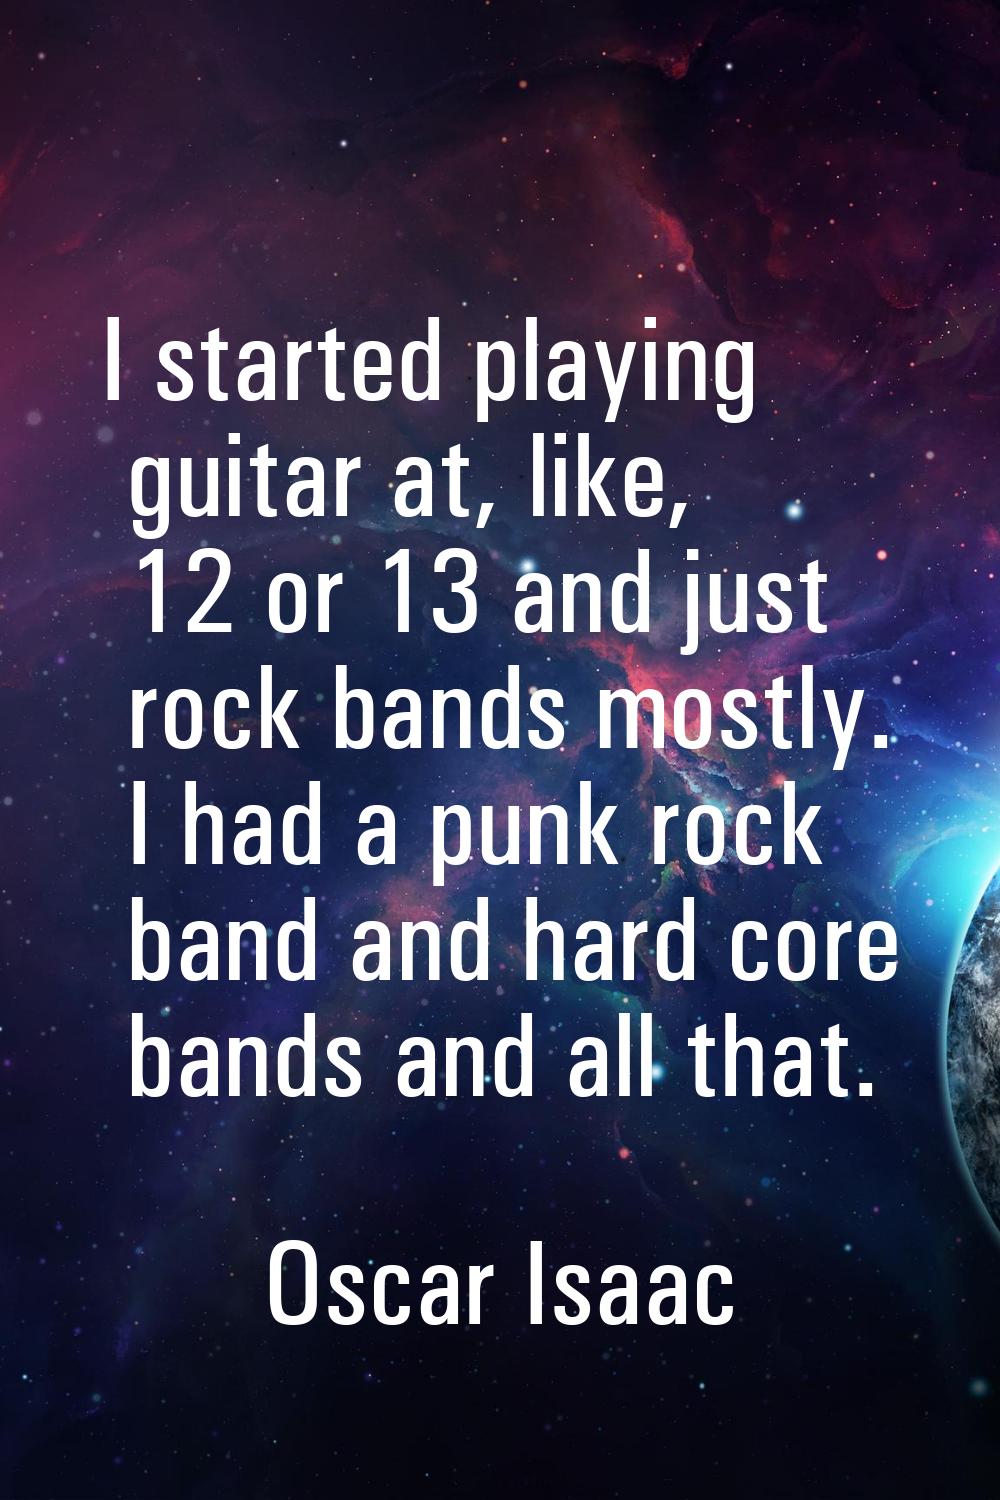 I started playing guitar at, like, 12 or 13 and just rock bands mostly. I had a punk rock band and 